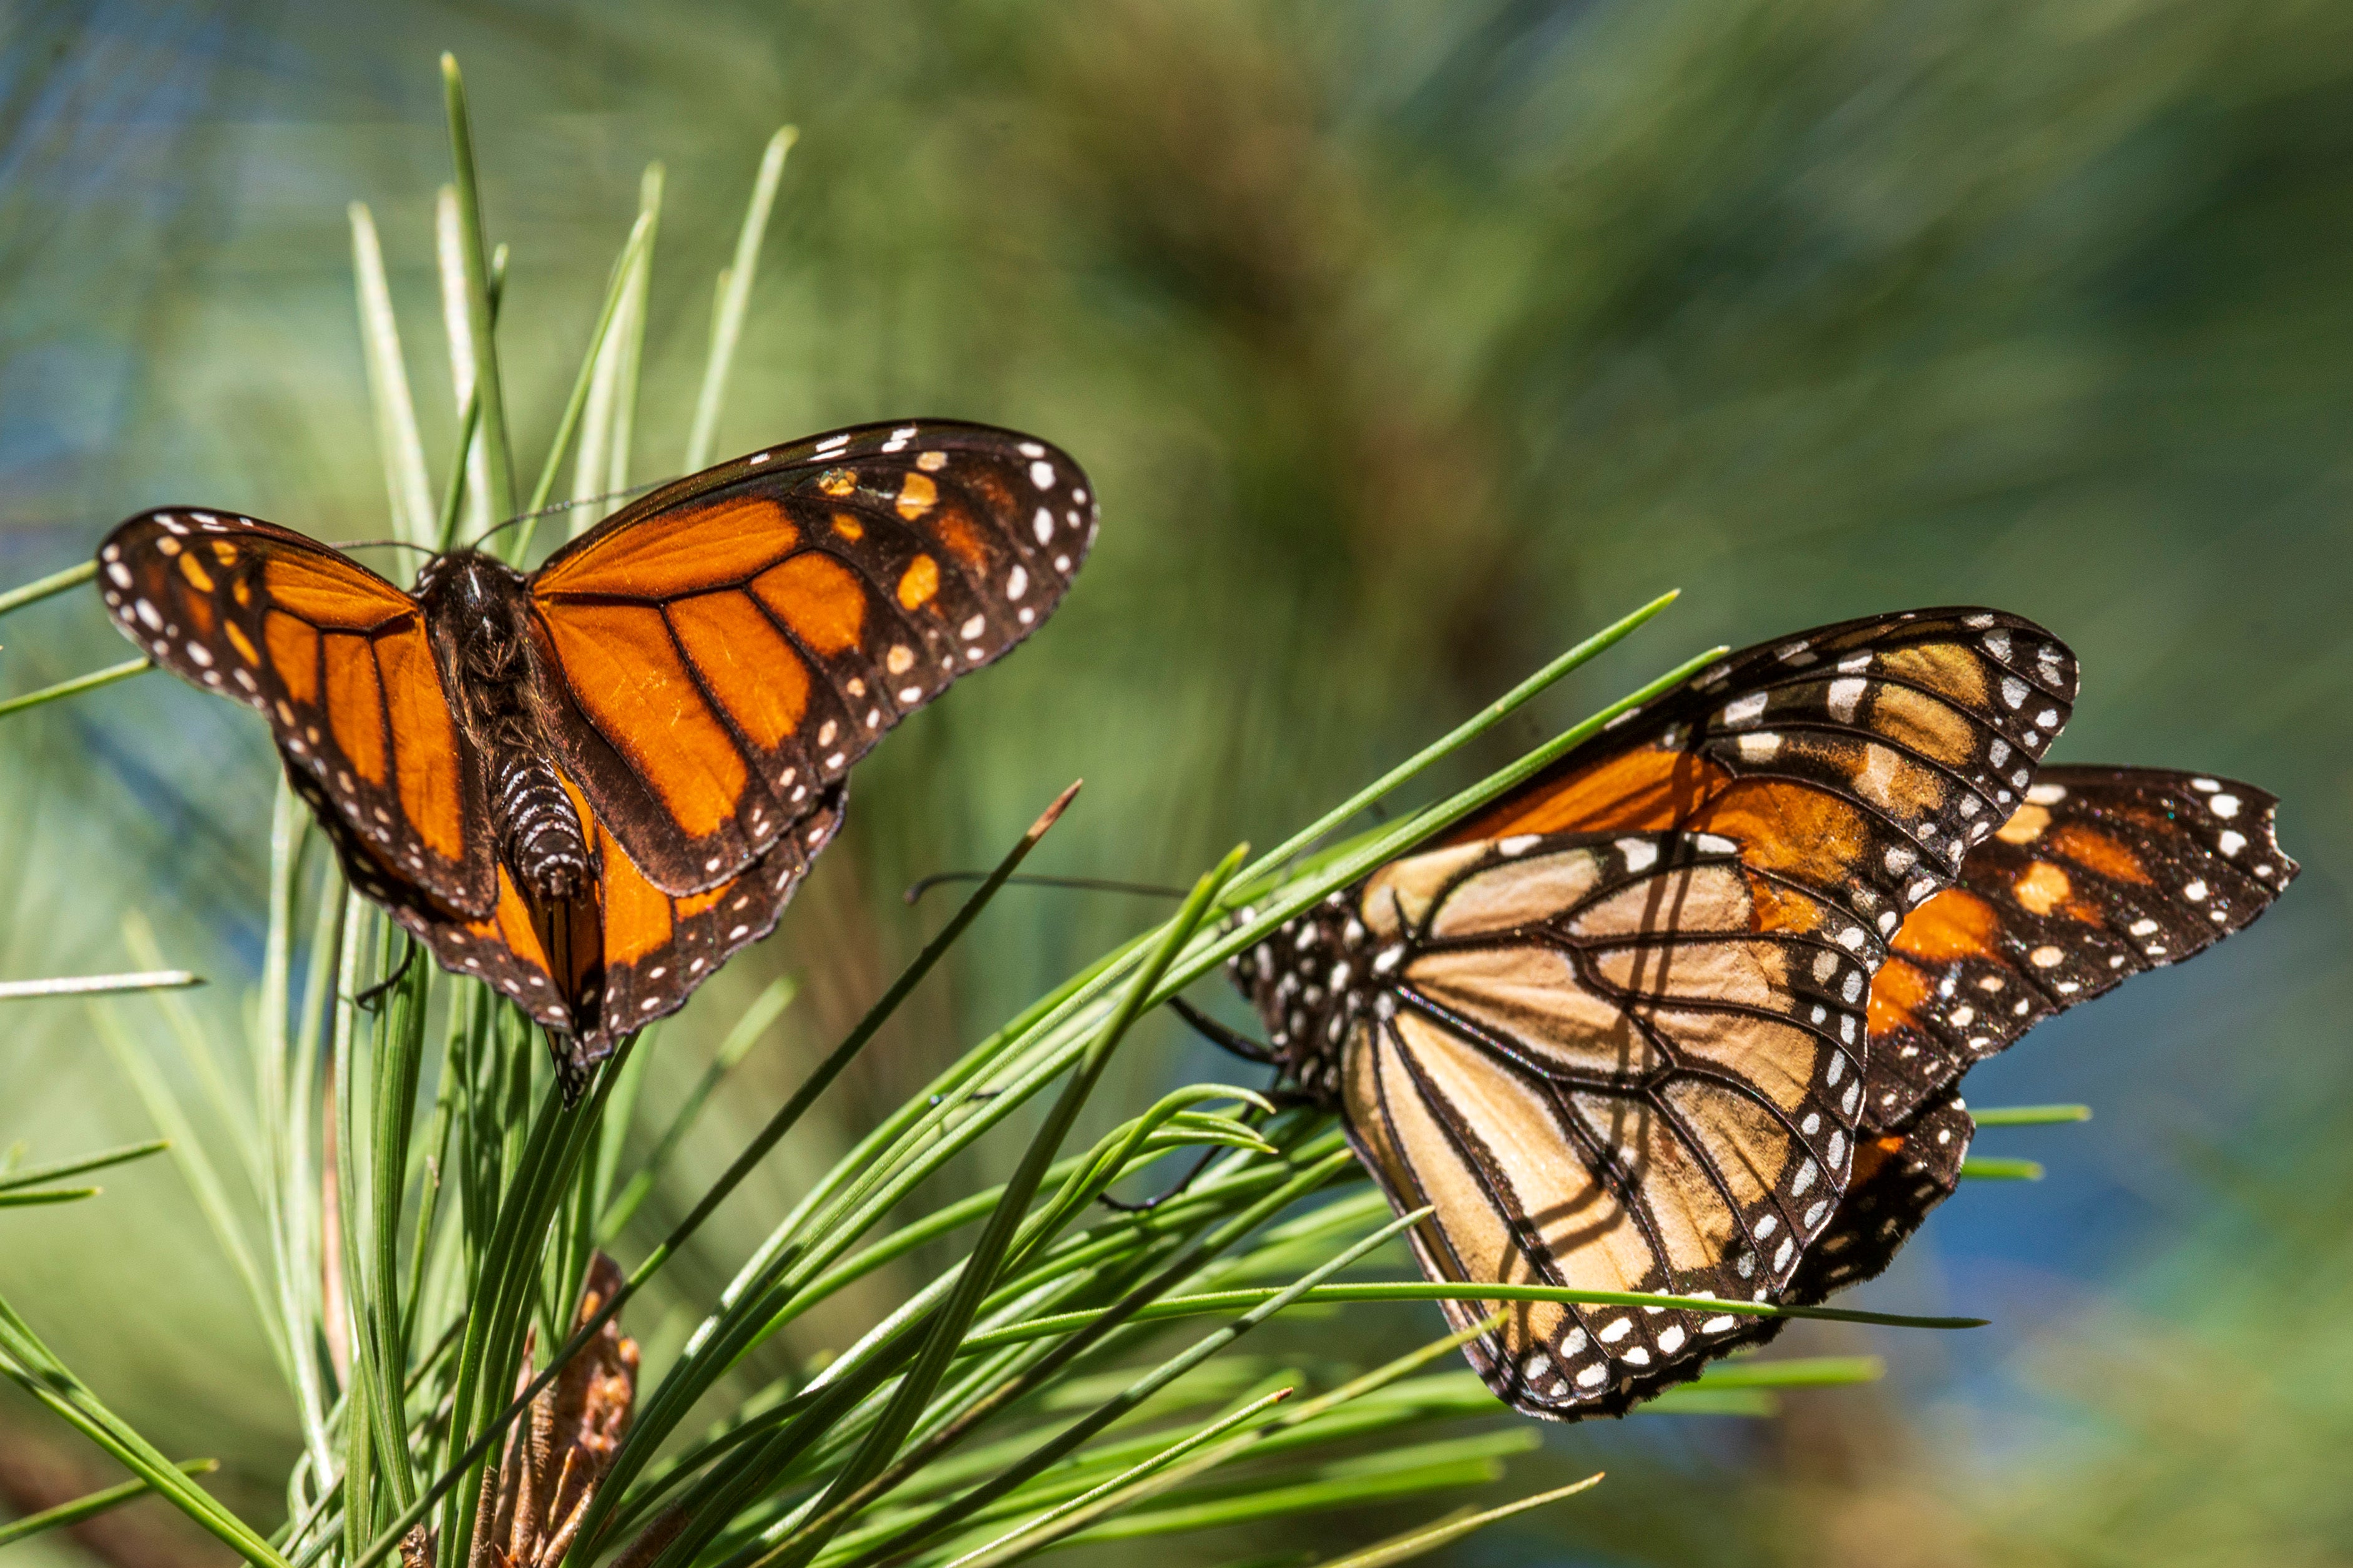 Monarch butterflies are officially on the endangered species list